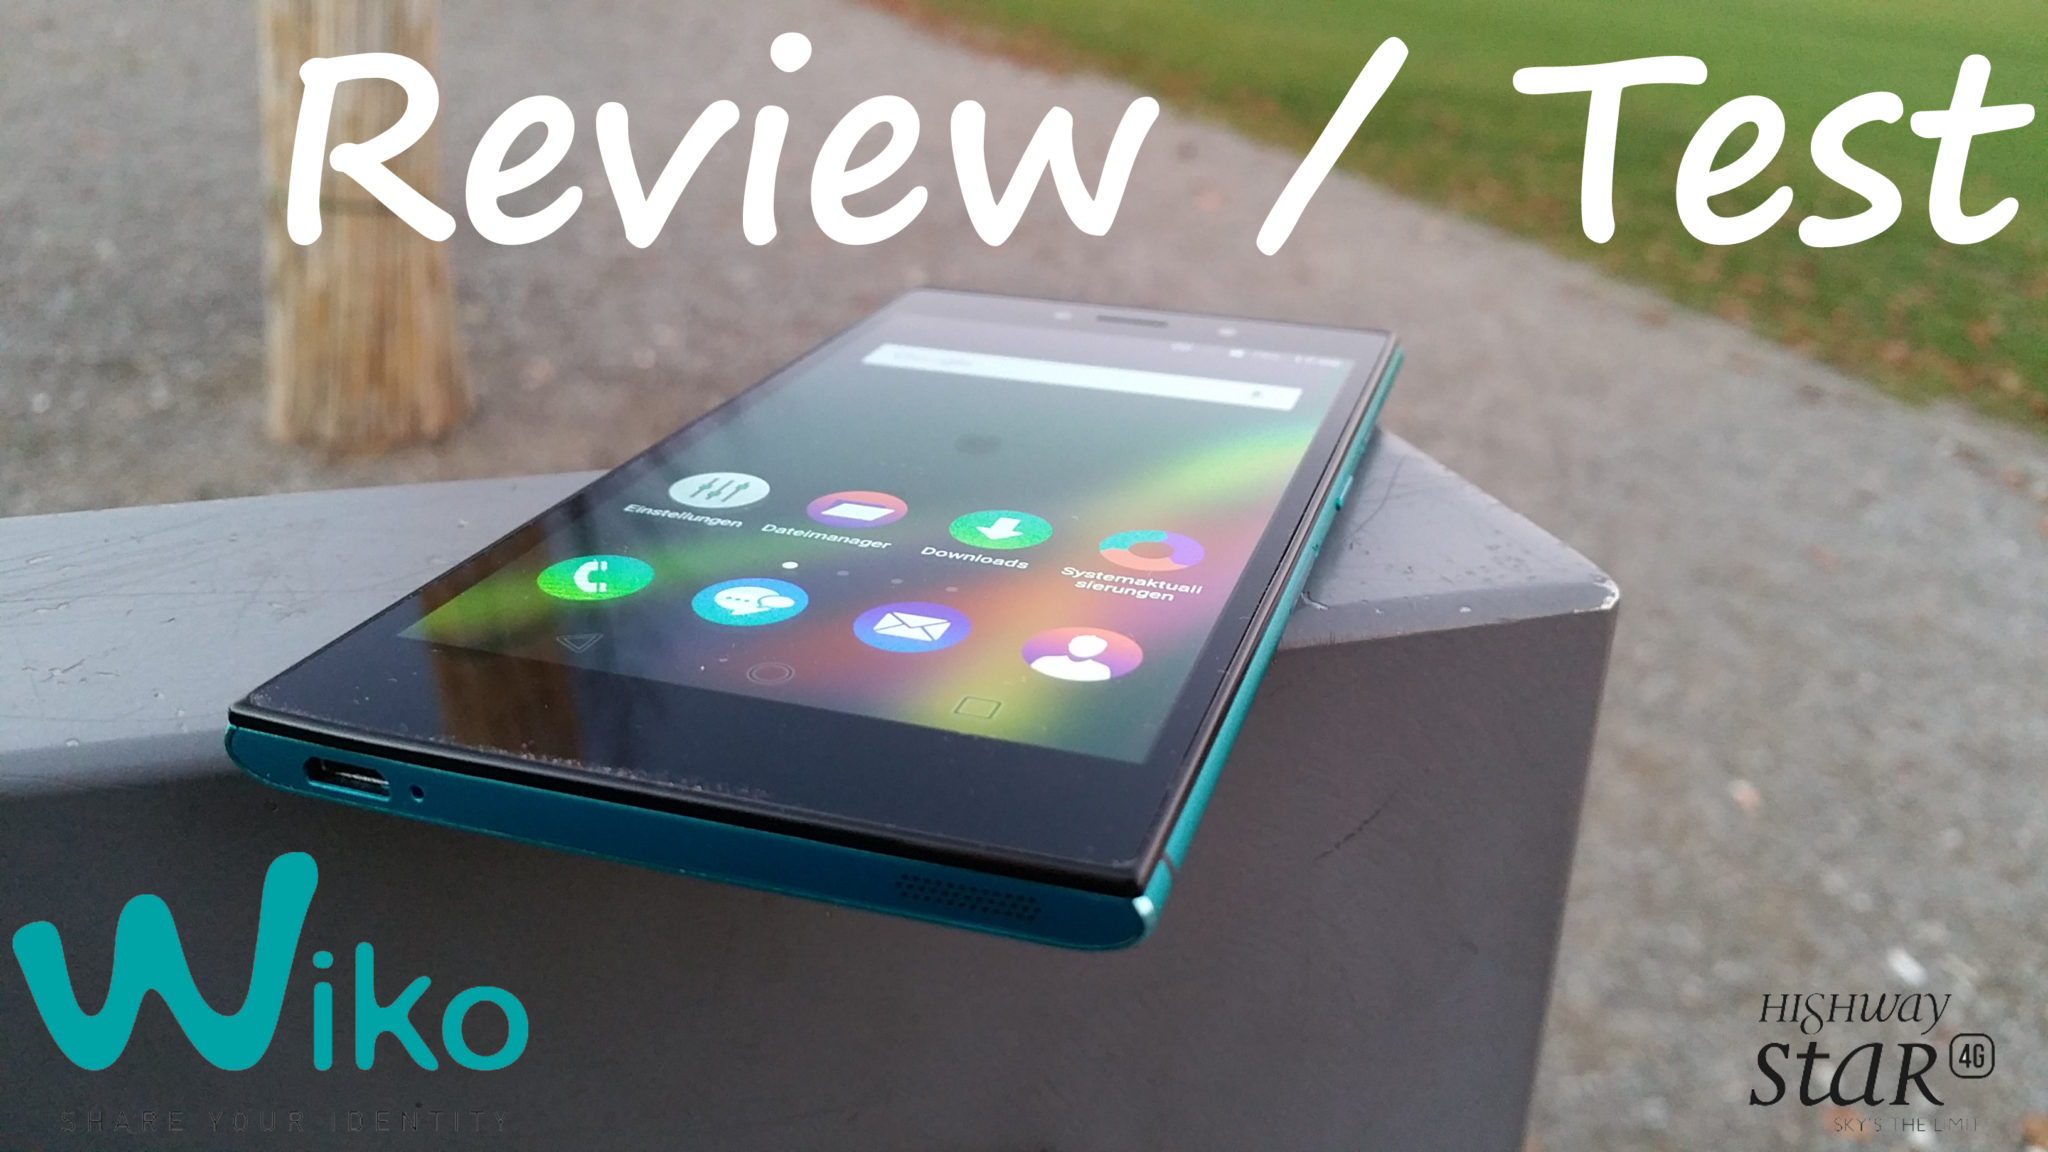 Wiko: Highway Star – Test / Review